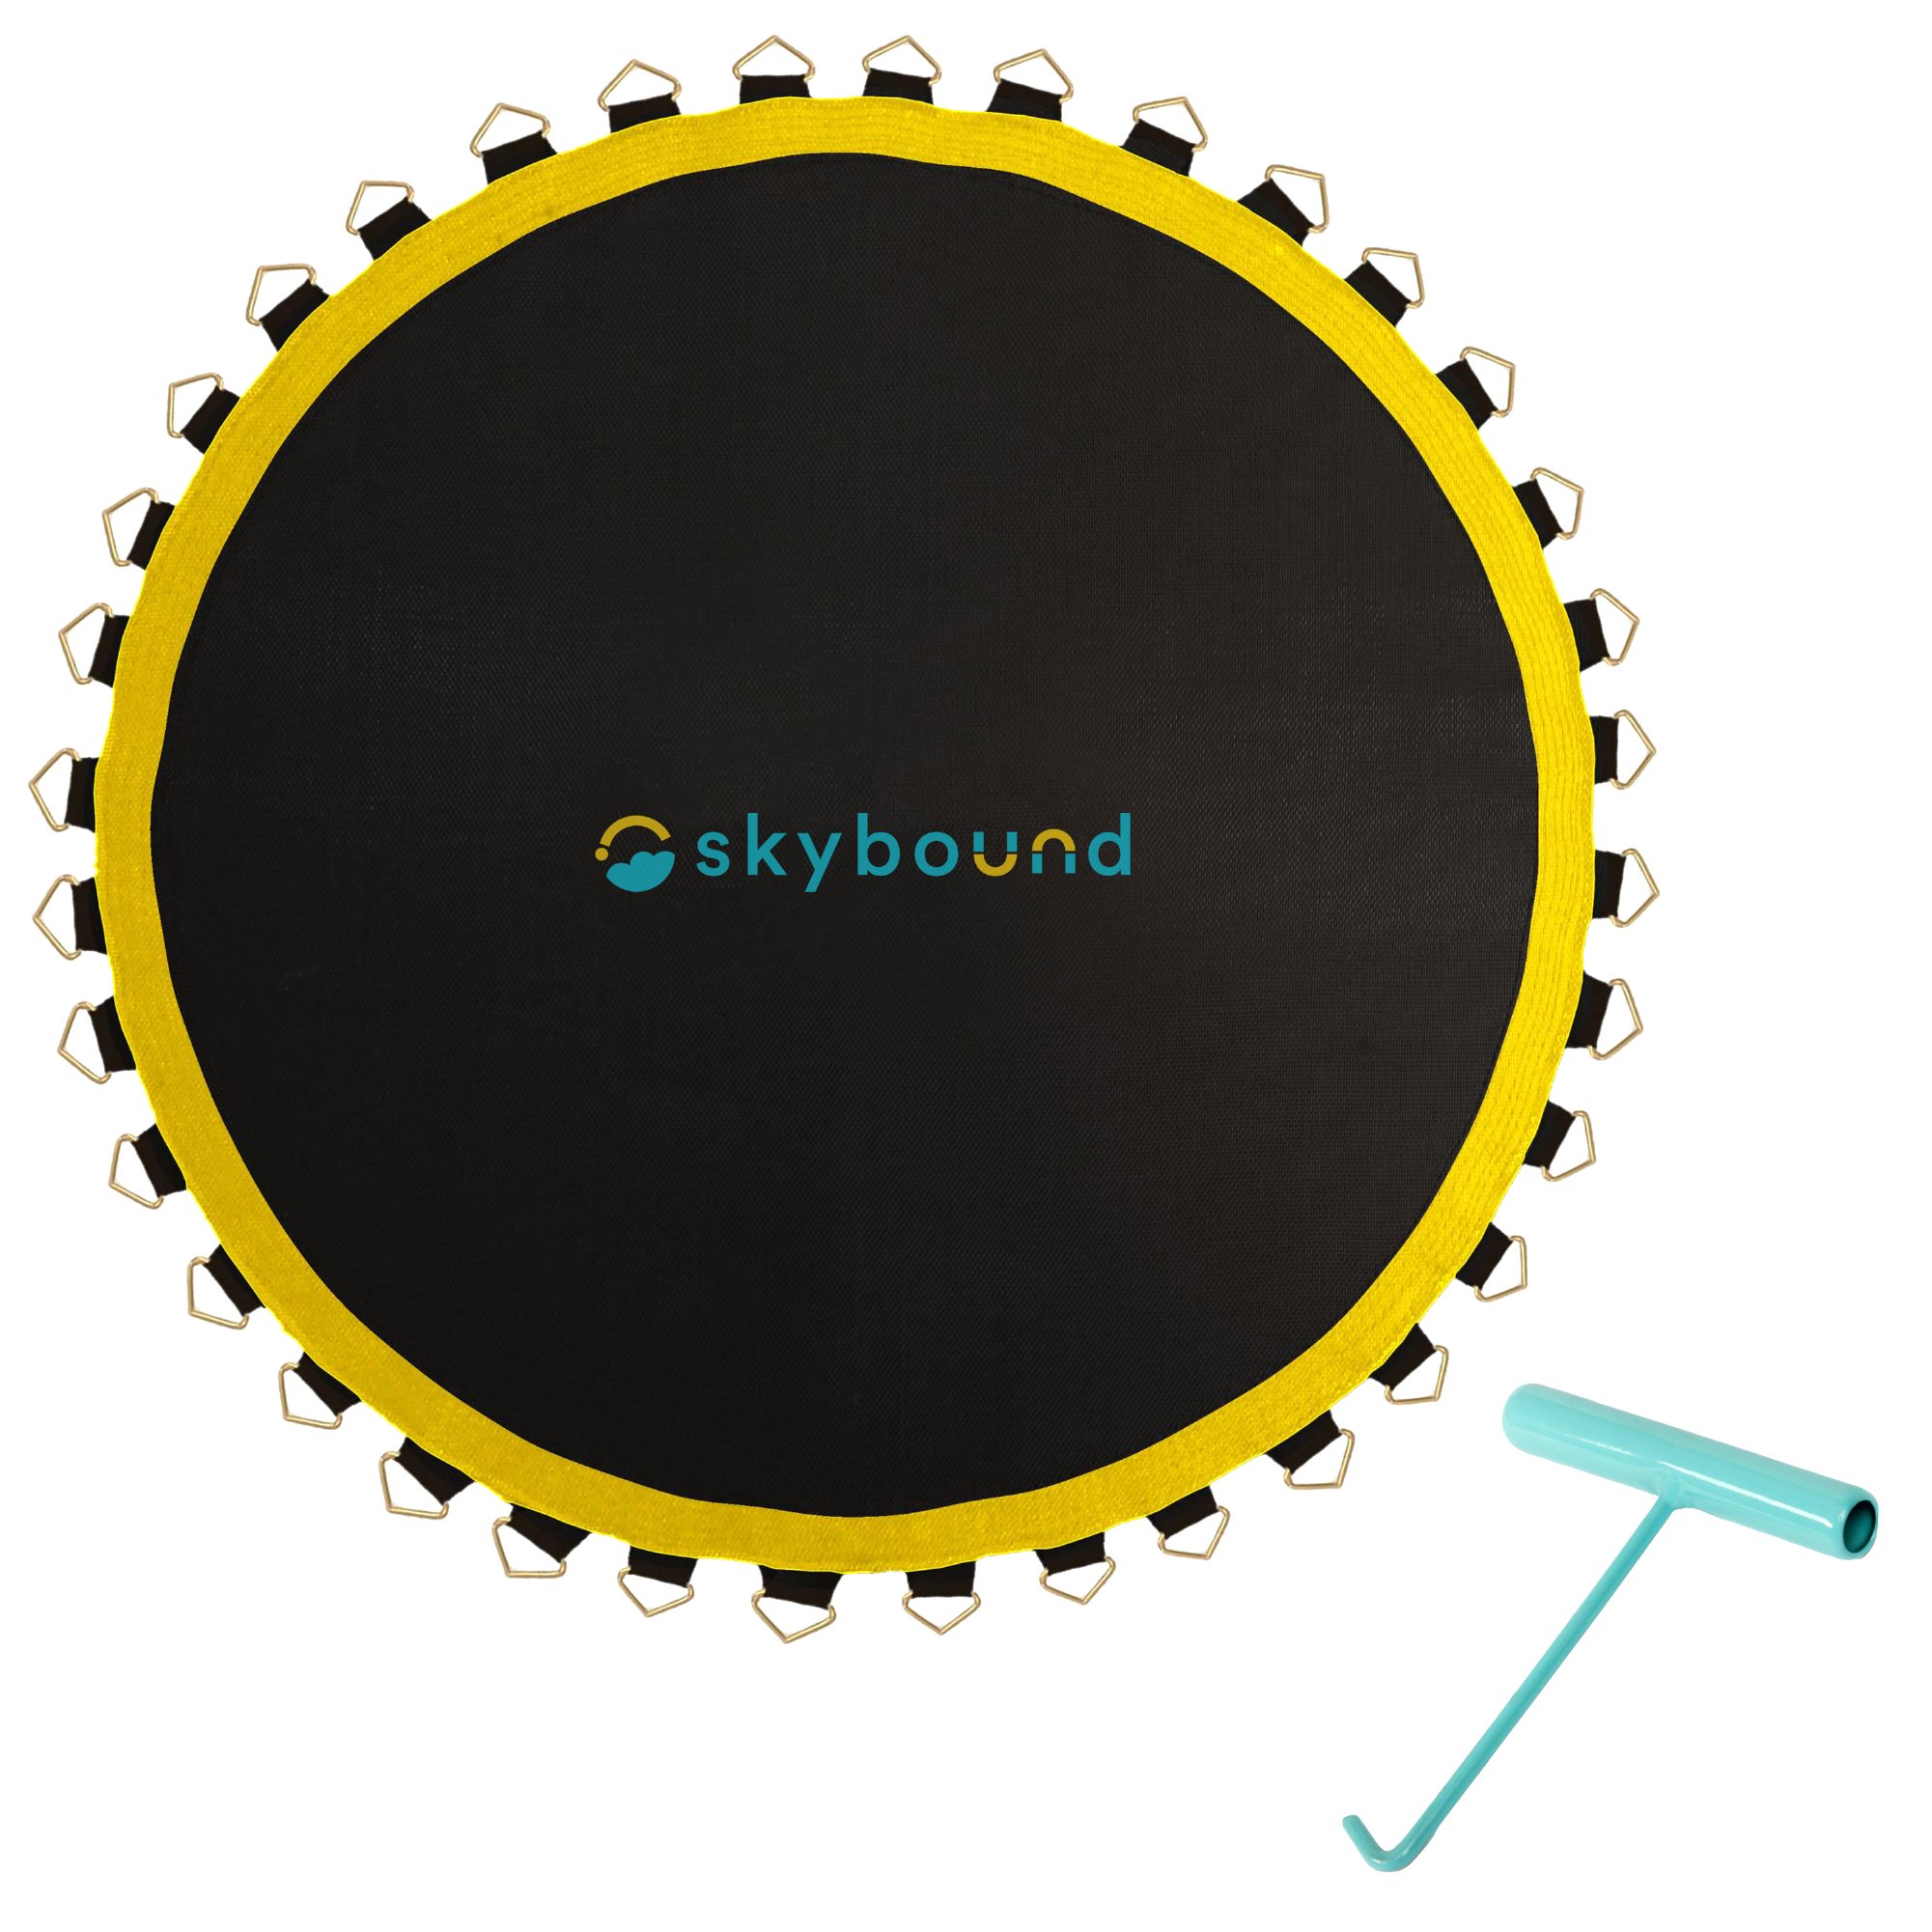 Premium Replacement Mat for 15ft Trampolines - 161in / 96 V-Rings / 6.5in Springs - SkyBound USA